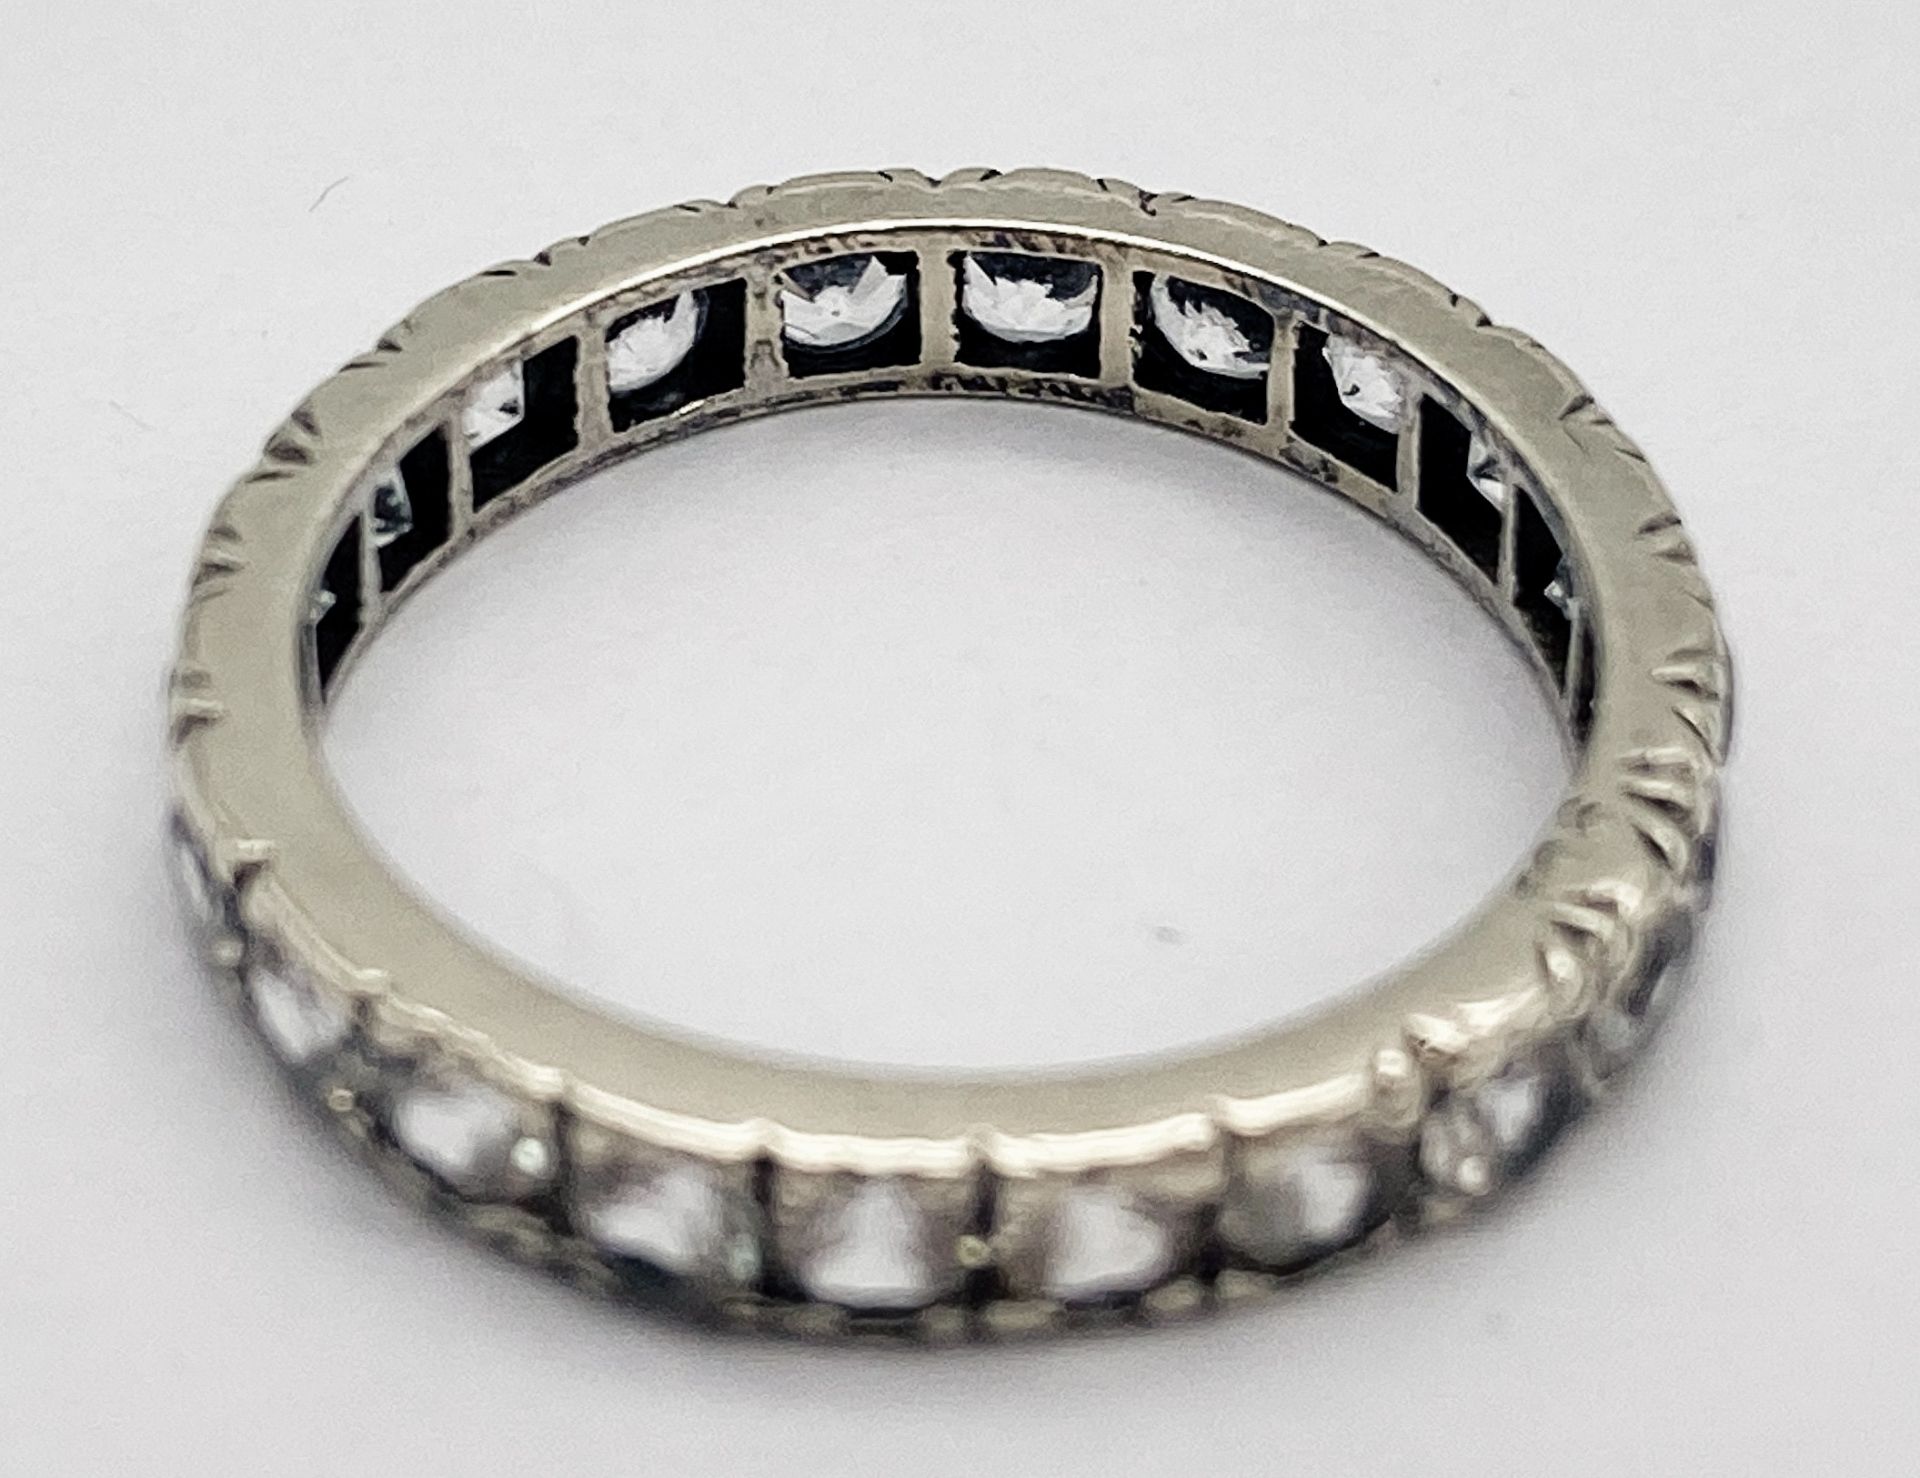 A VINTAGE 9K WHITE GOLD (TESTED) WHITE STONE FULL ETERNITY RING. 2.5G. SIZE 0. - Image 4 of 6